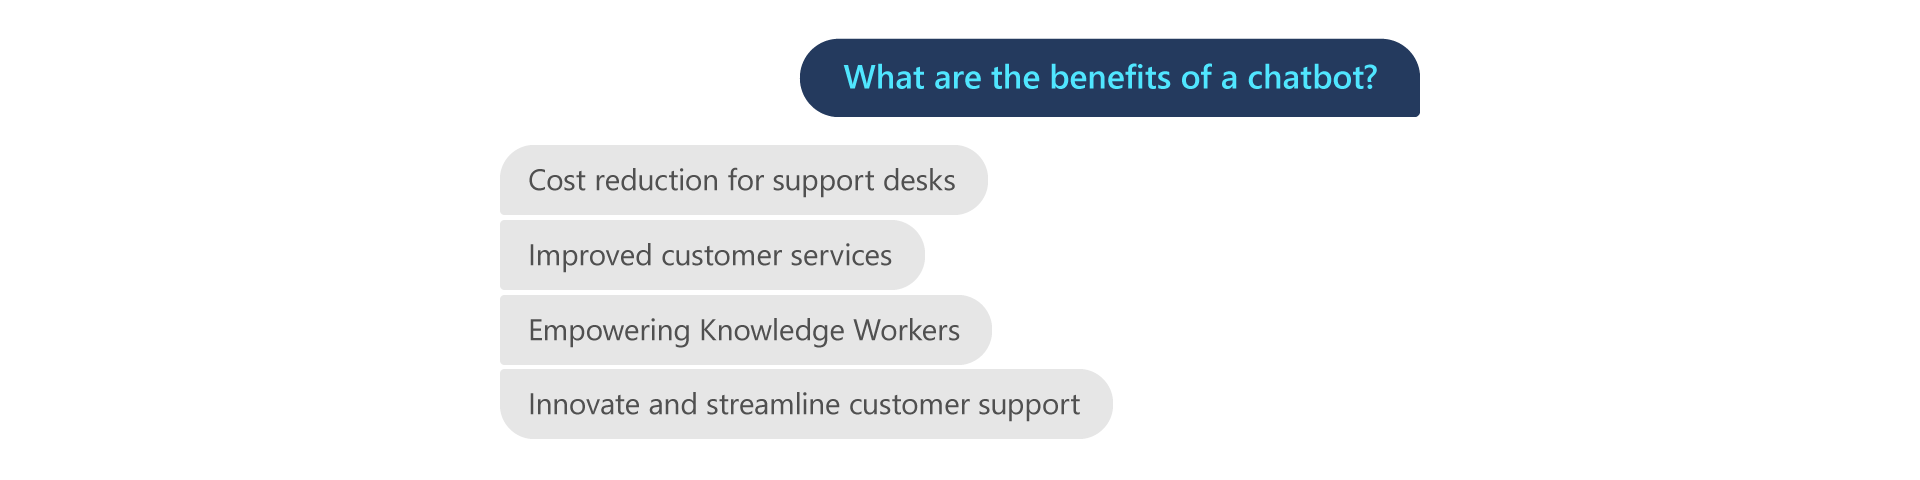 Benefits of a chatbot